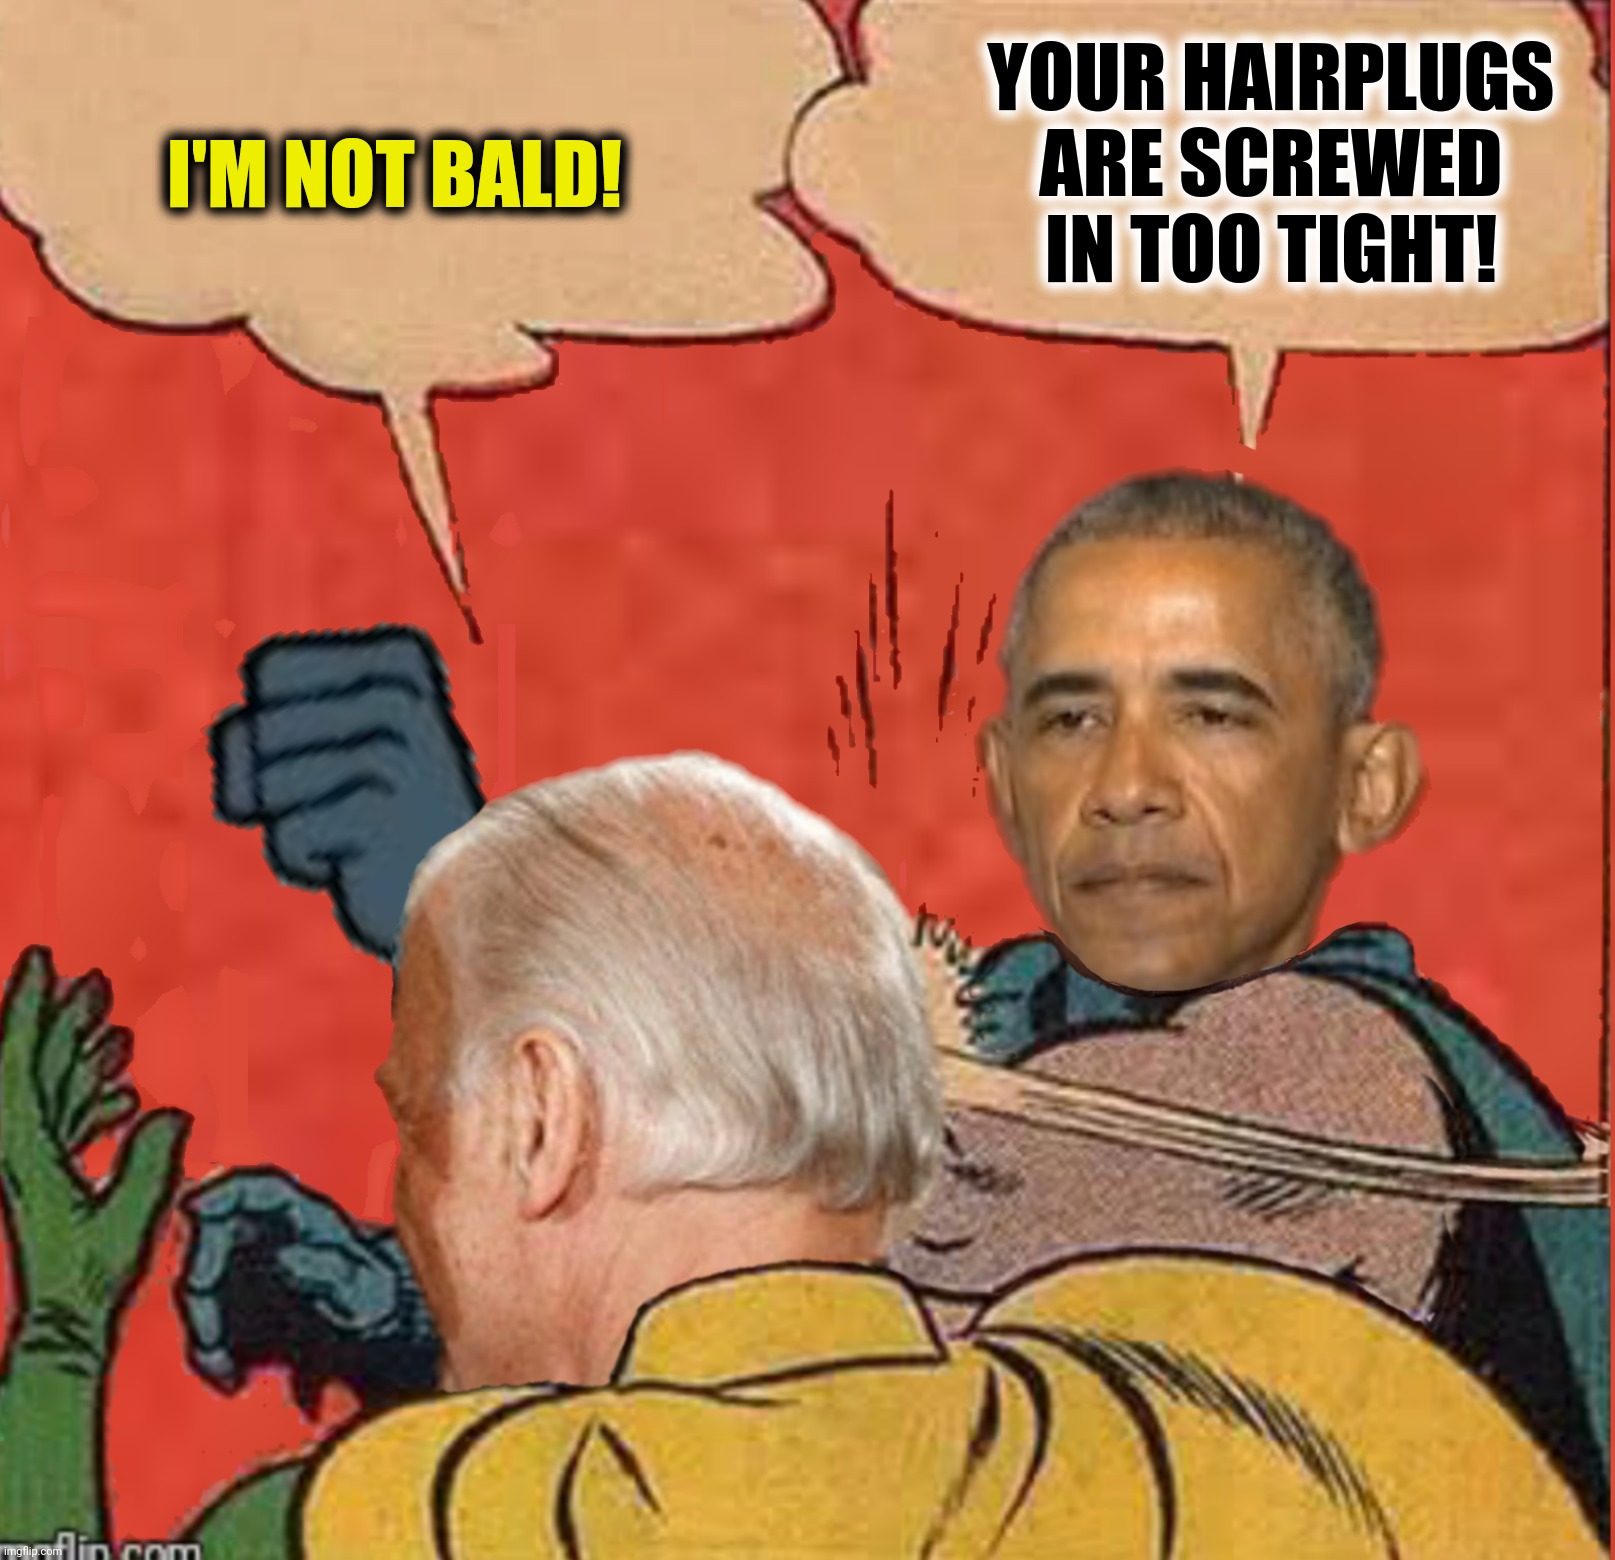 I'M NOT BALD! YOUR HAIRPLUGS ARE SCREWED IN TOO TIGHT! | made w/ Imgflip meme maker